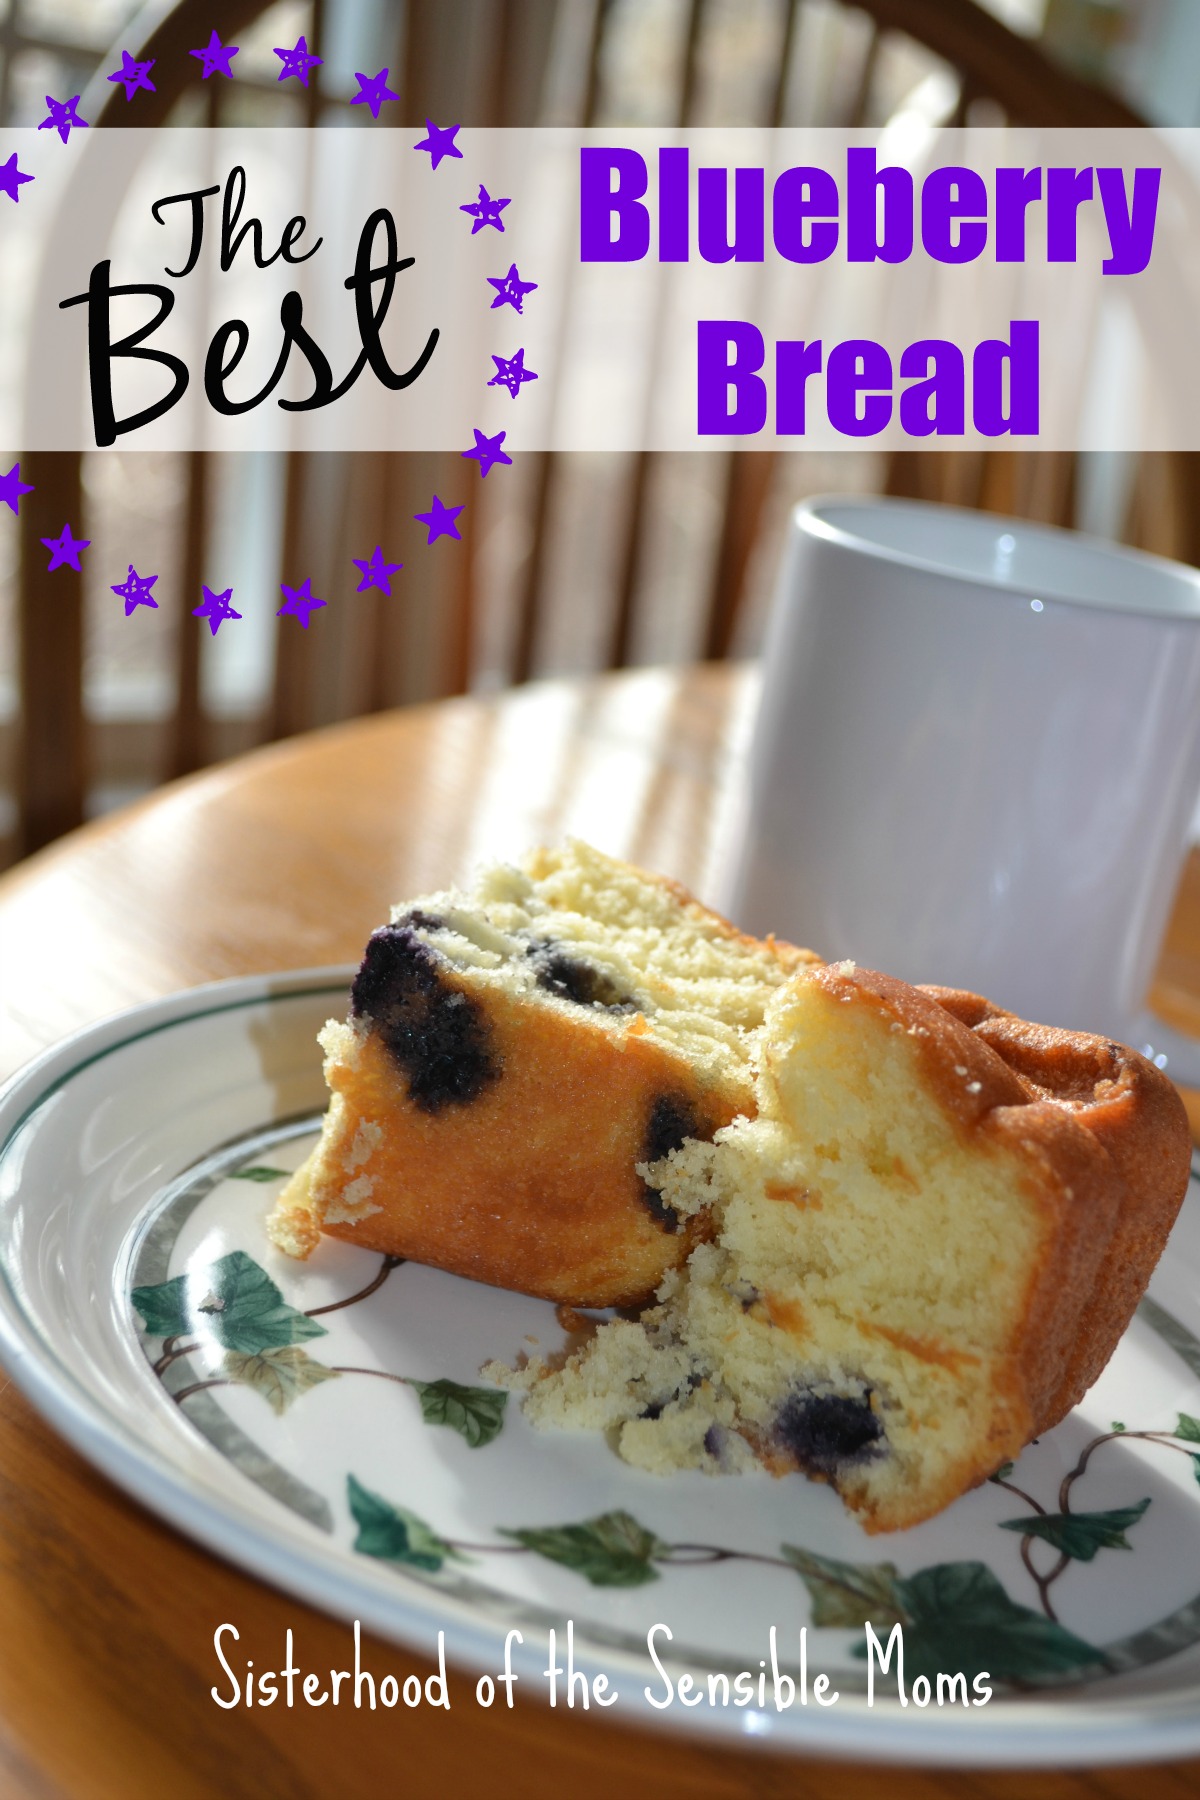 Looking for inexpensive, easy, but heartfelt Valentine's Day's ideas? This best blueberry bread is great for breakfast in bed | Sisterhood of the Sensible Moms